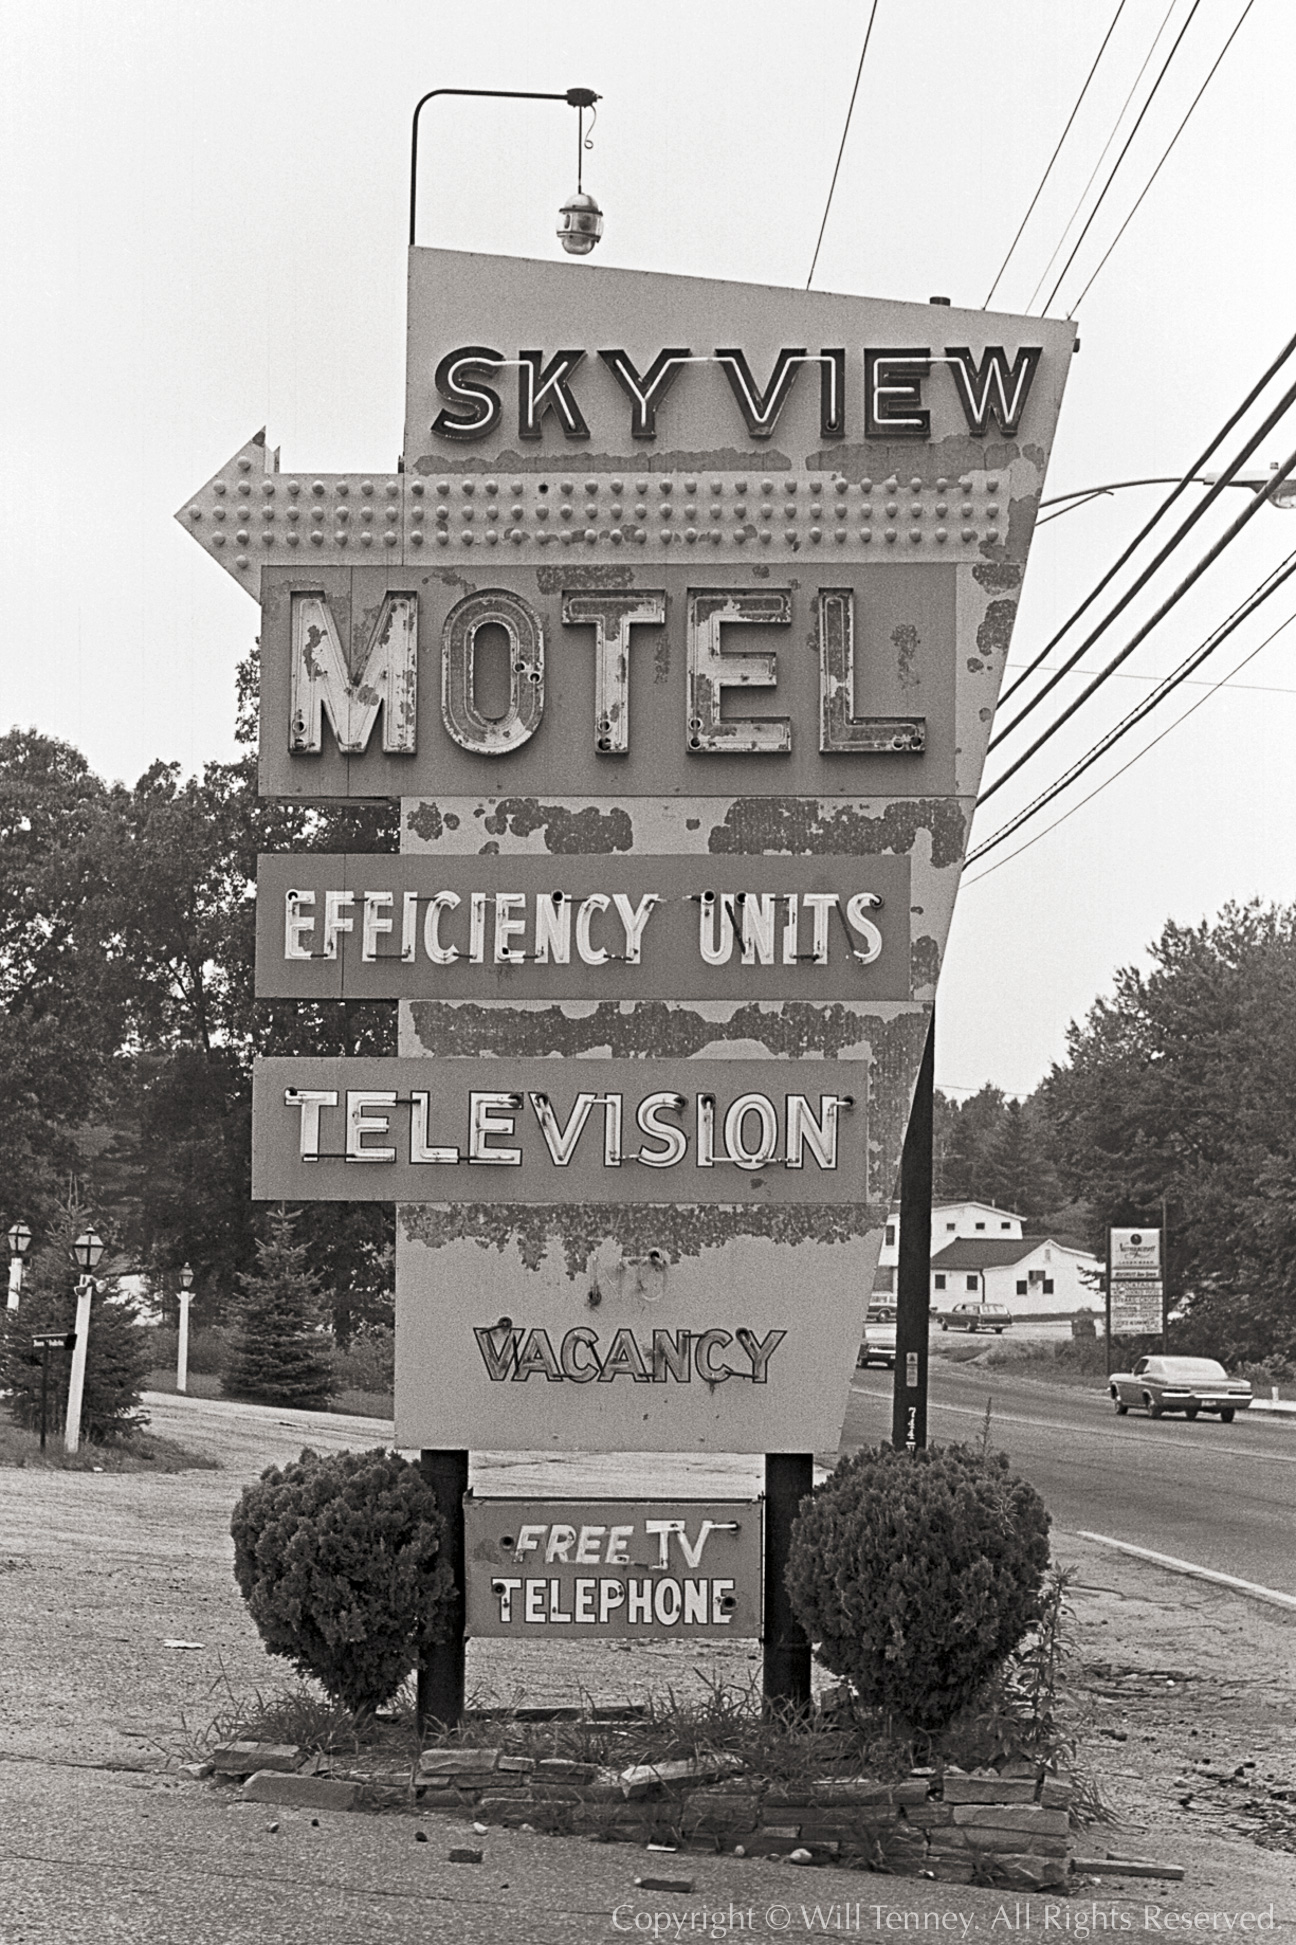 Sky View Motel: Photograph by Will Tenney